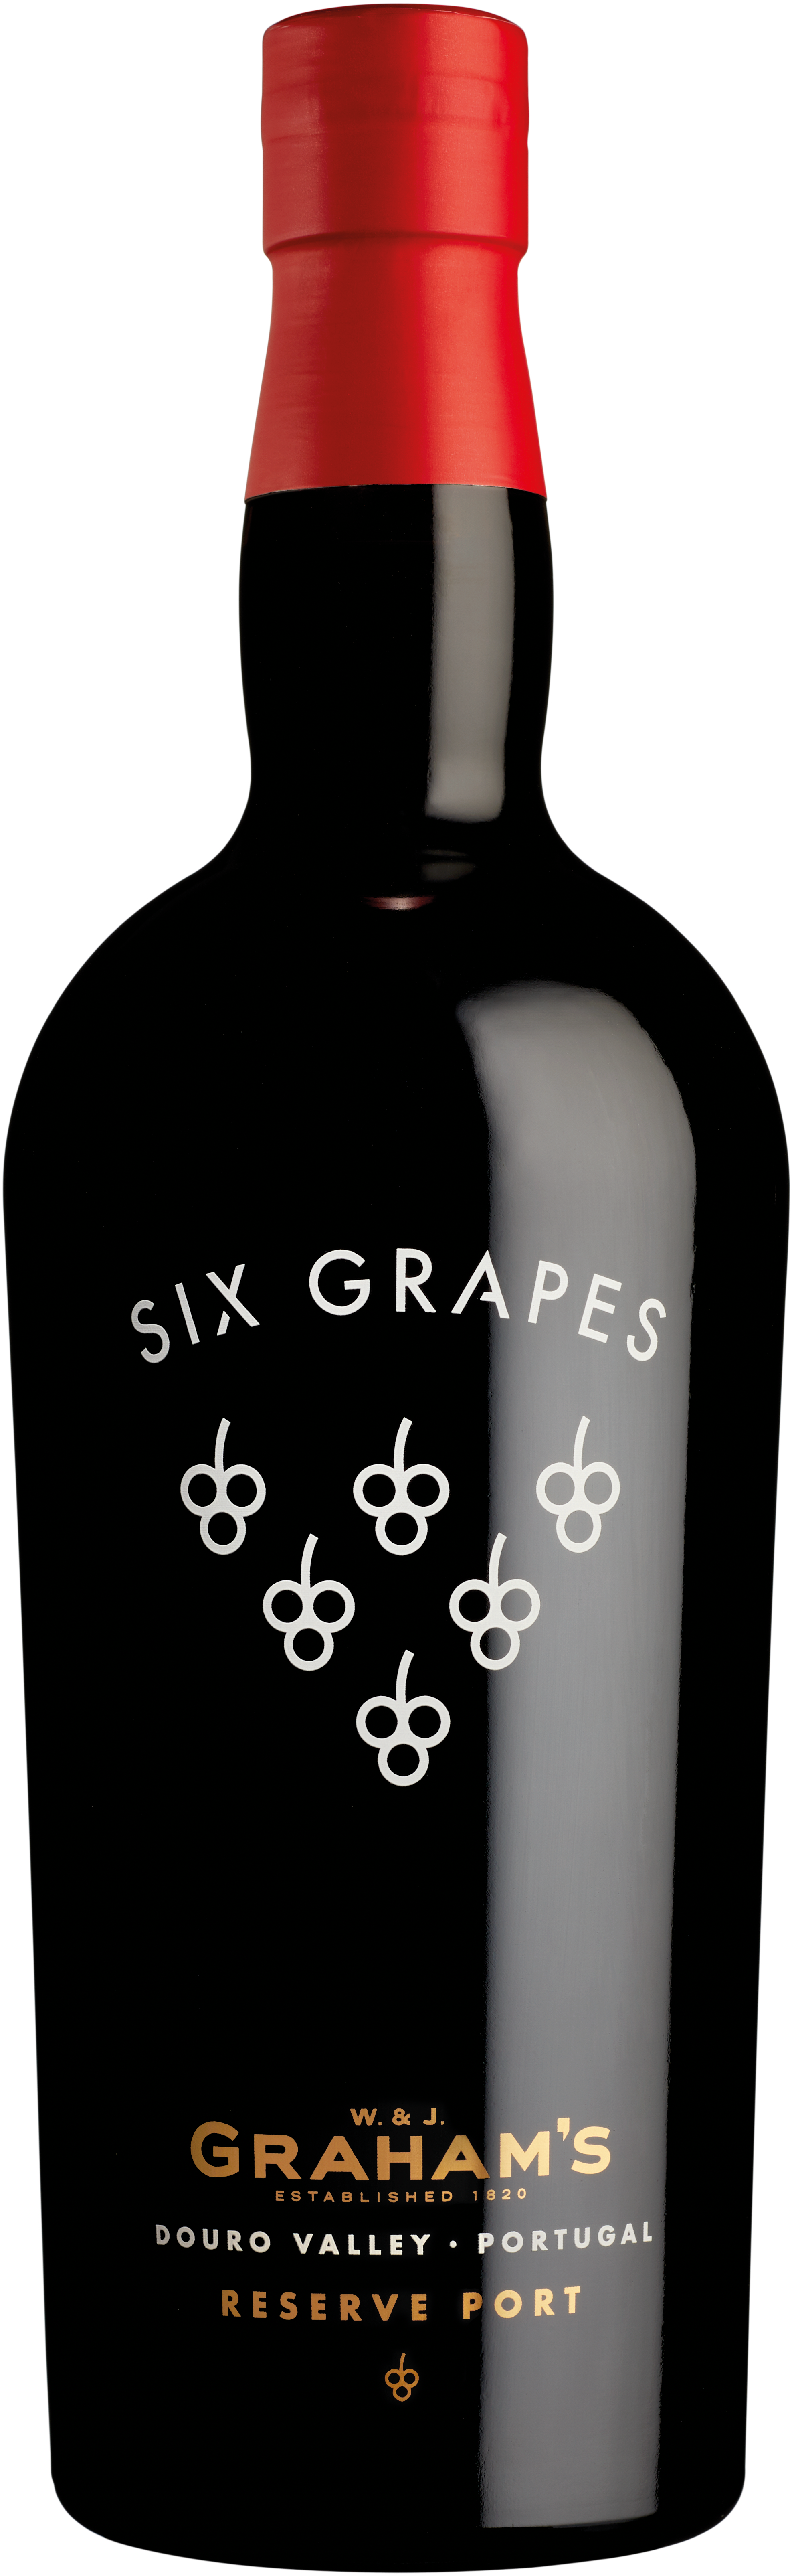 Product Image for GRAHAM'S SIX GRAPES RESERVE PORT 